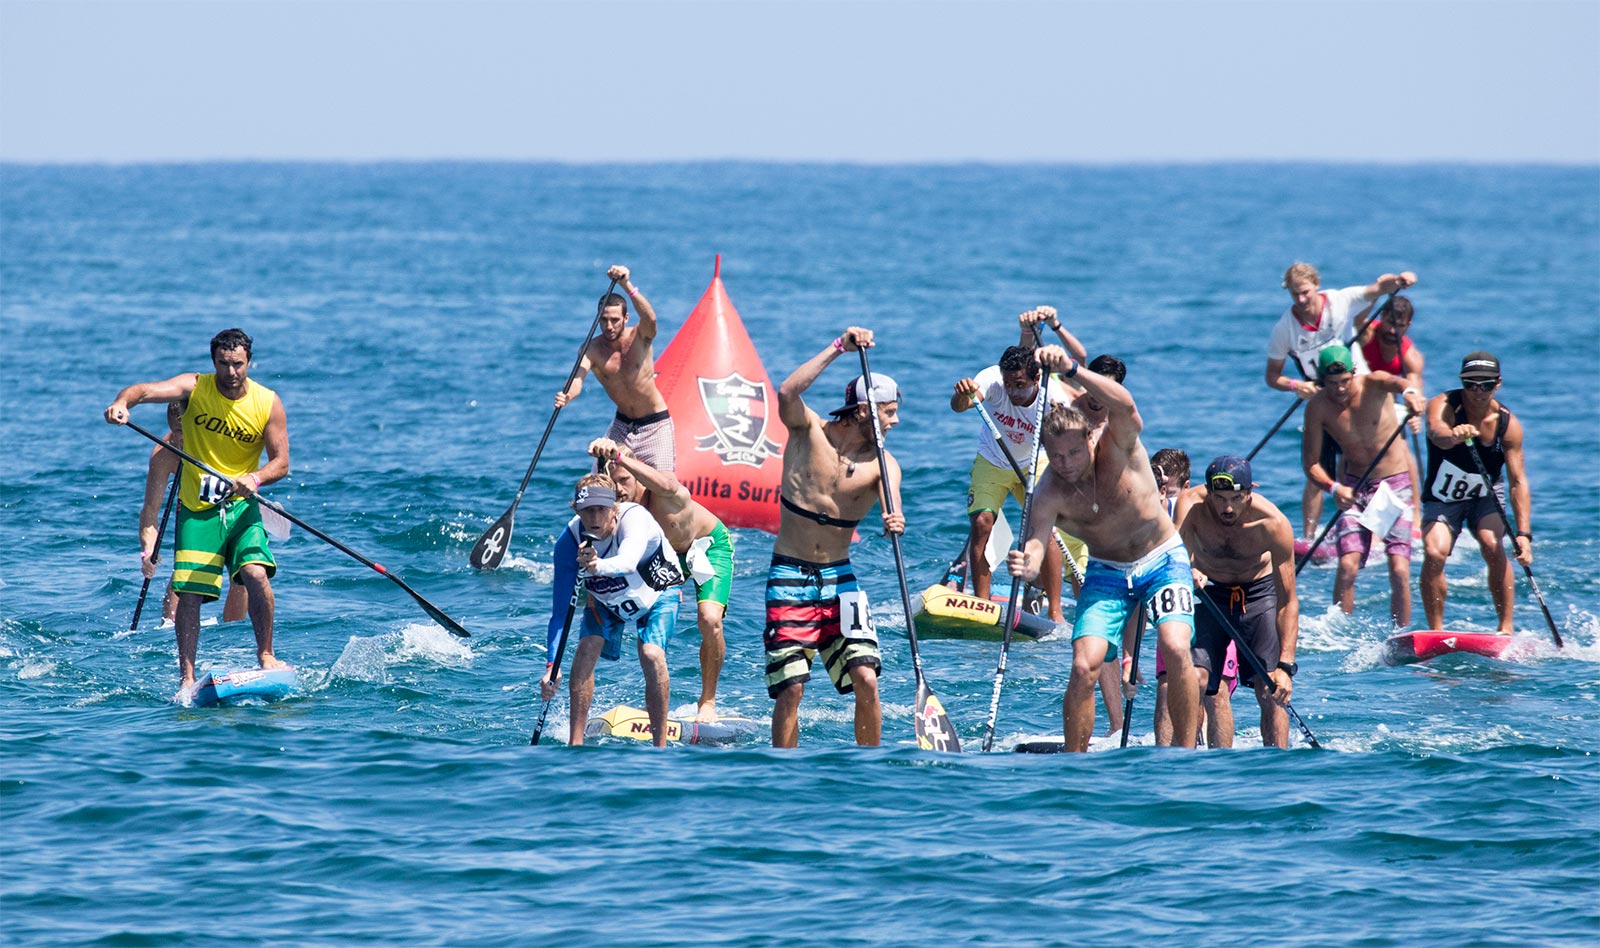 ISA stand up paddleboarding